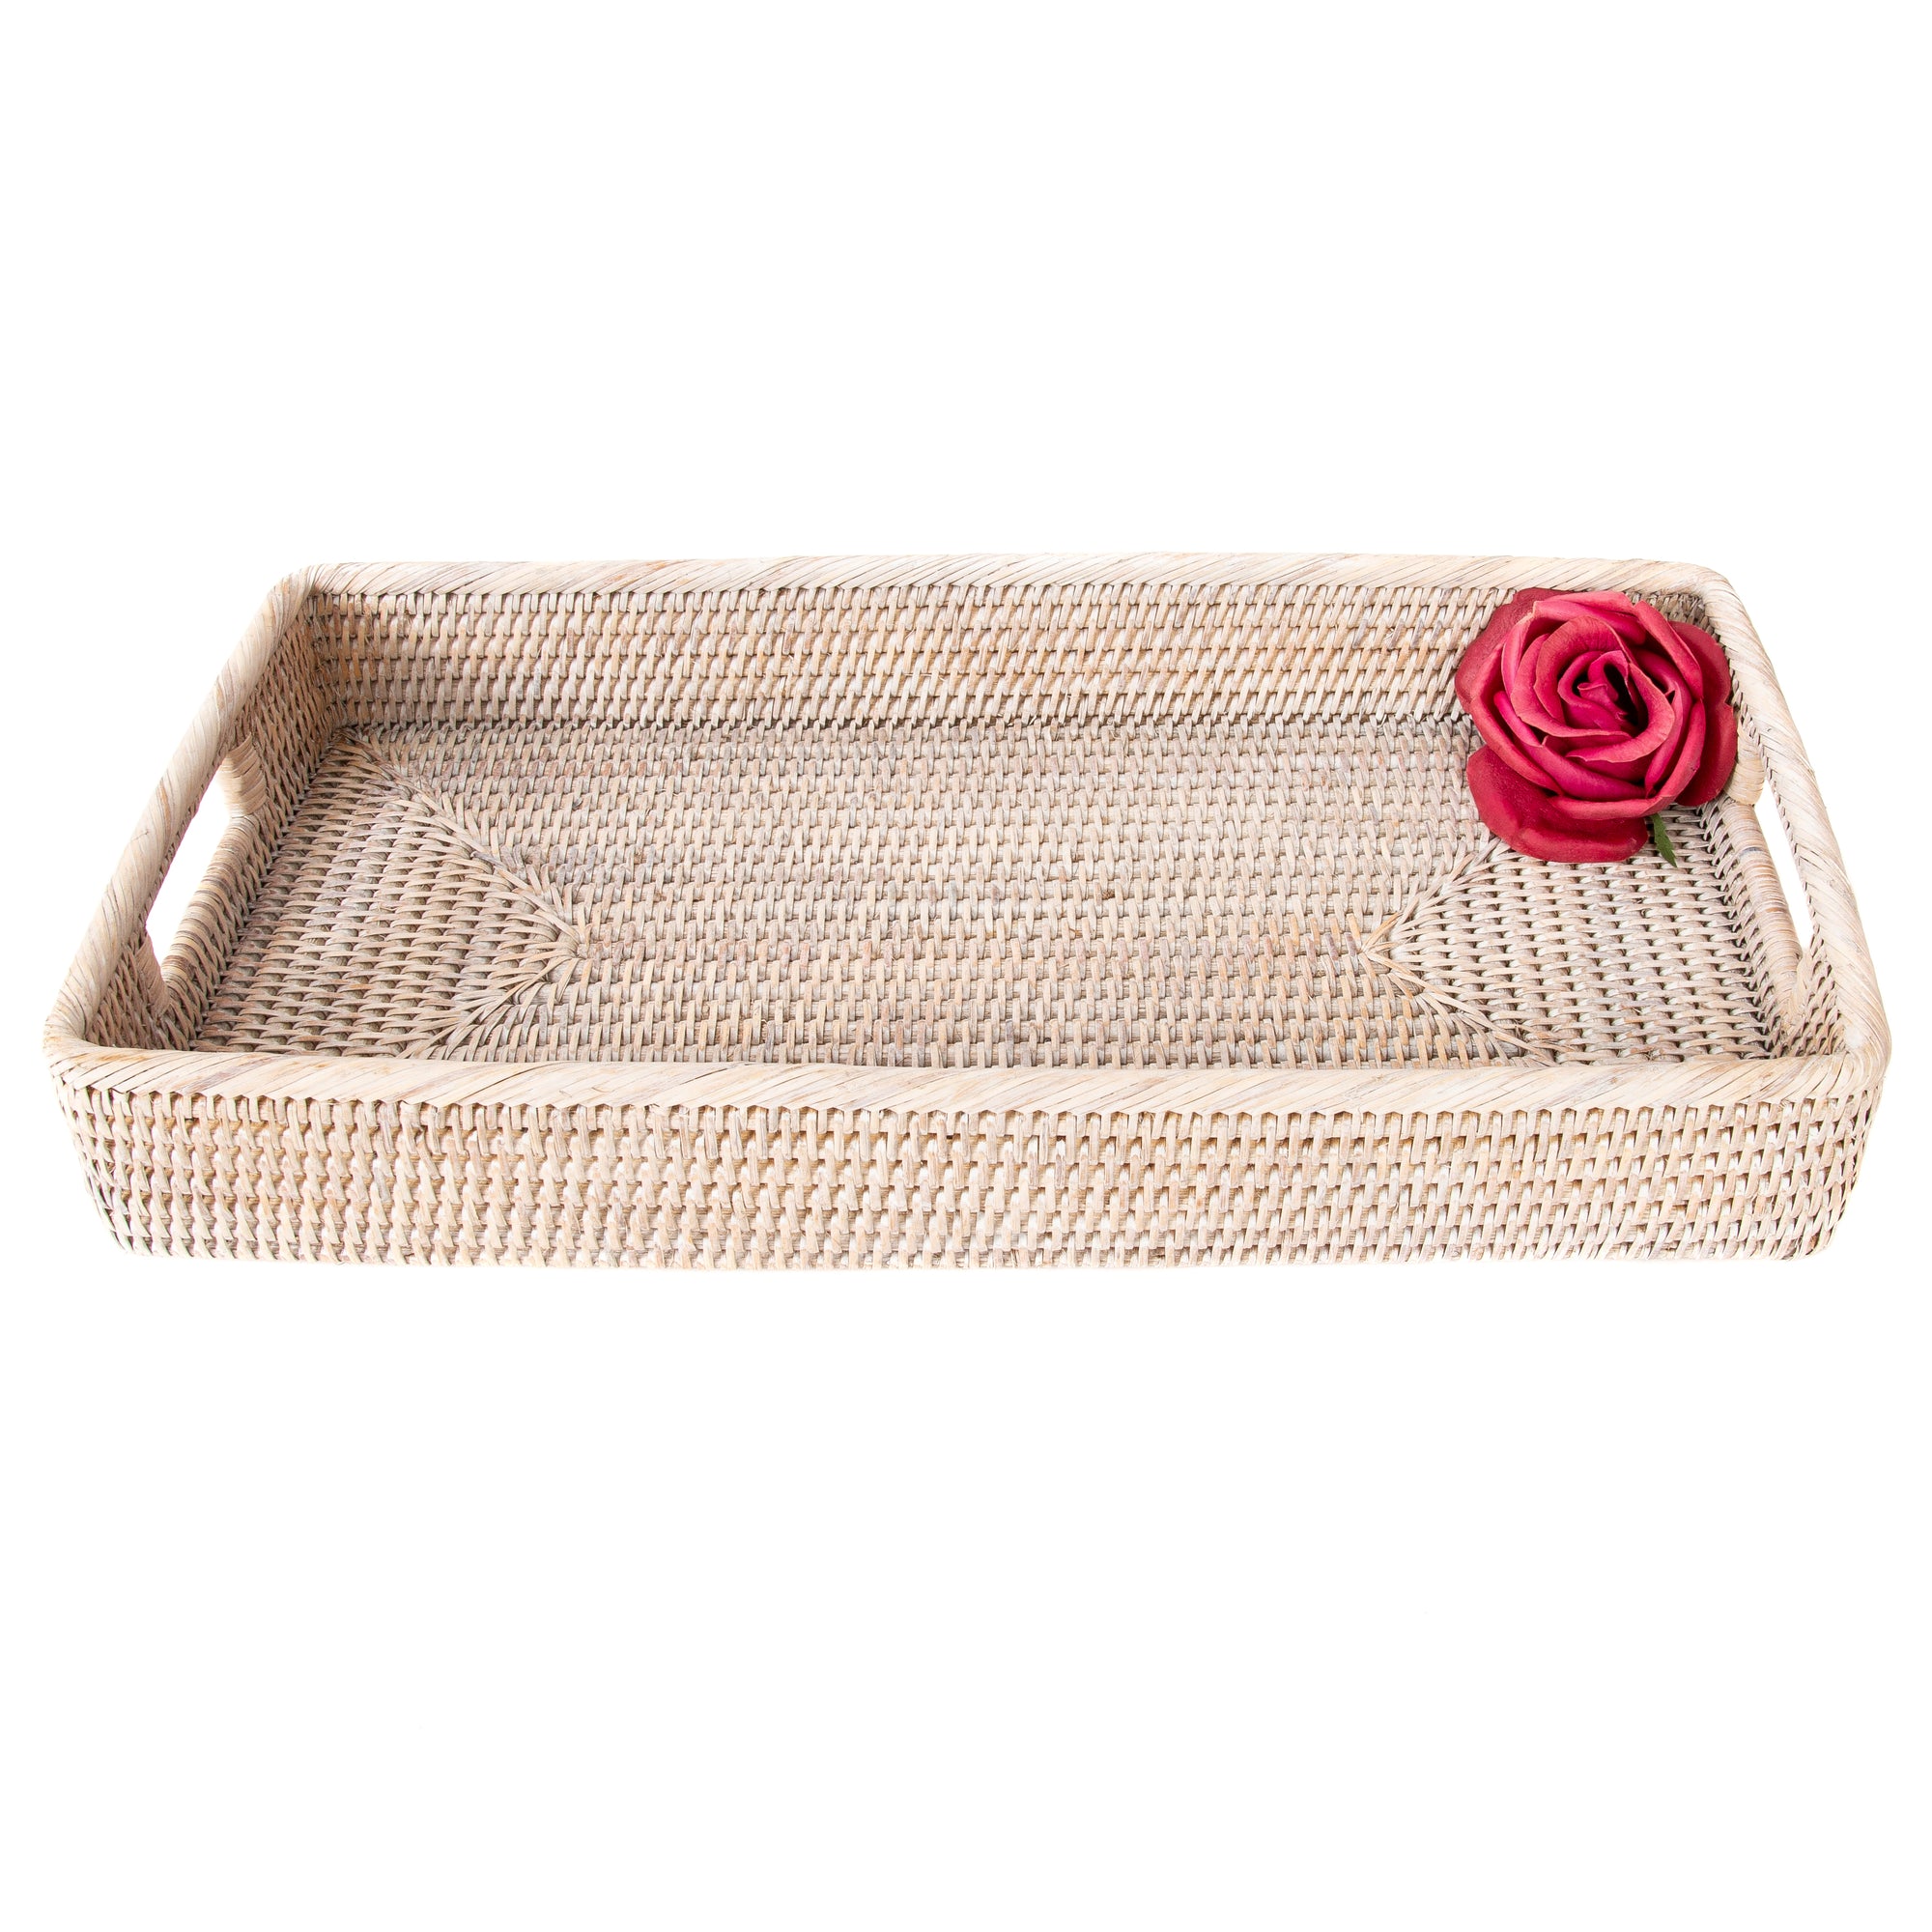 Rectangular Tray with Rounded Corners